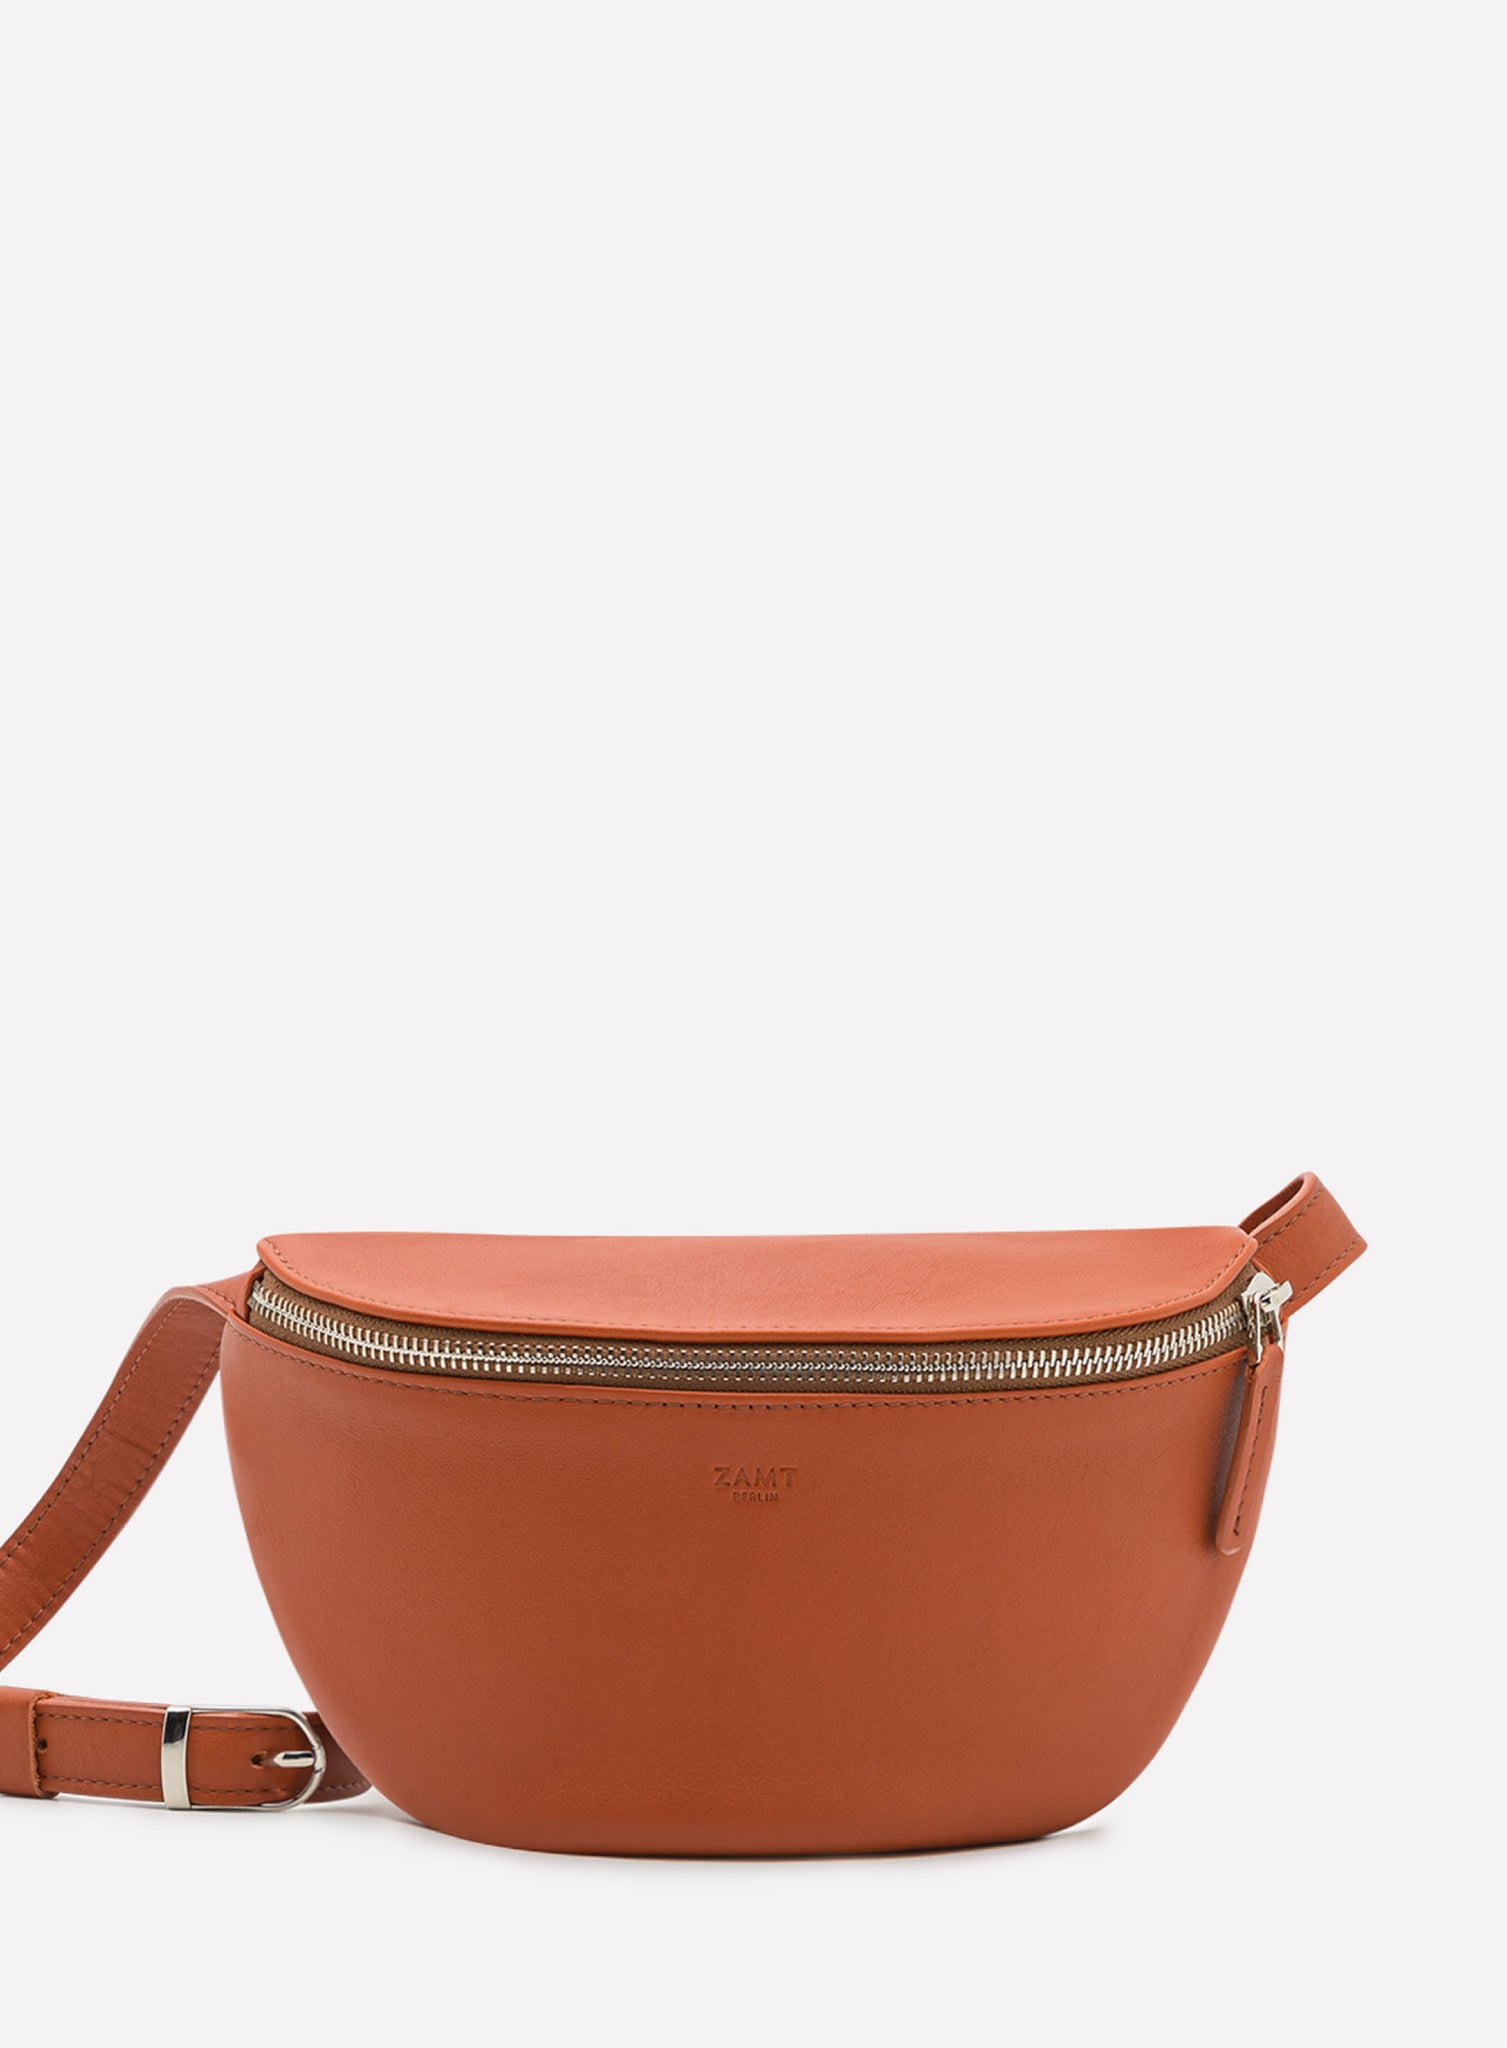 HIP_BAG_CAN_Terracotta_Designed_in_Berlin_Made_to_last_Handmade_in_Poland.